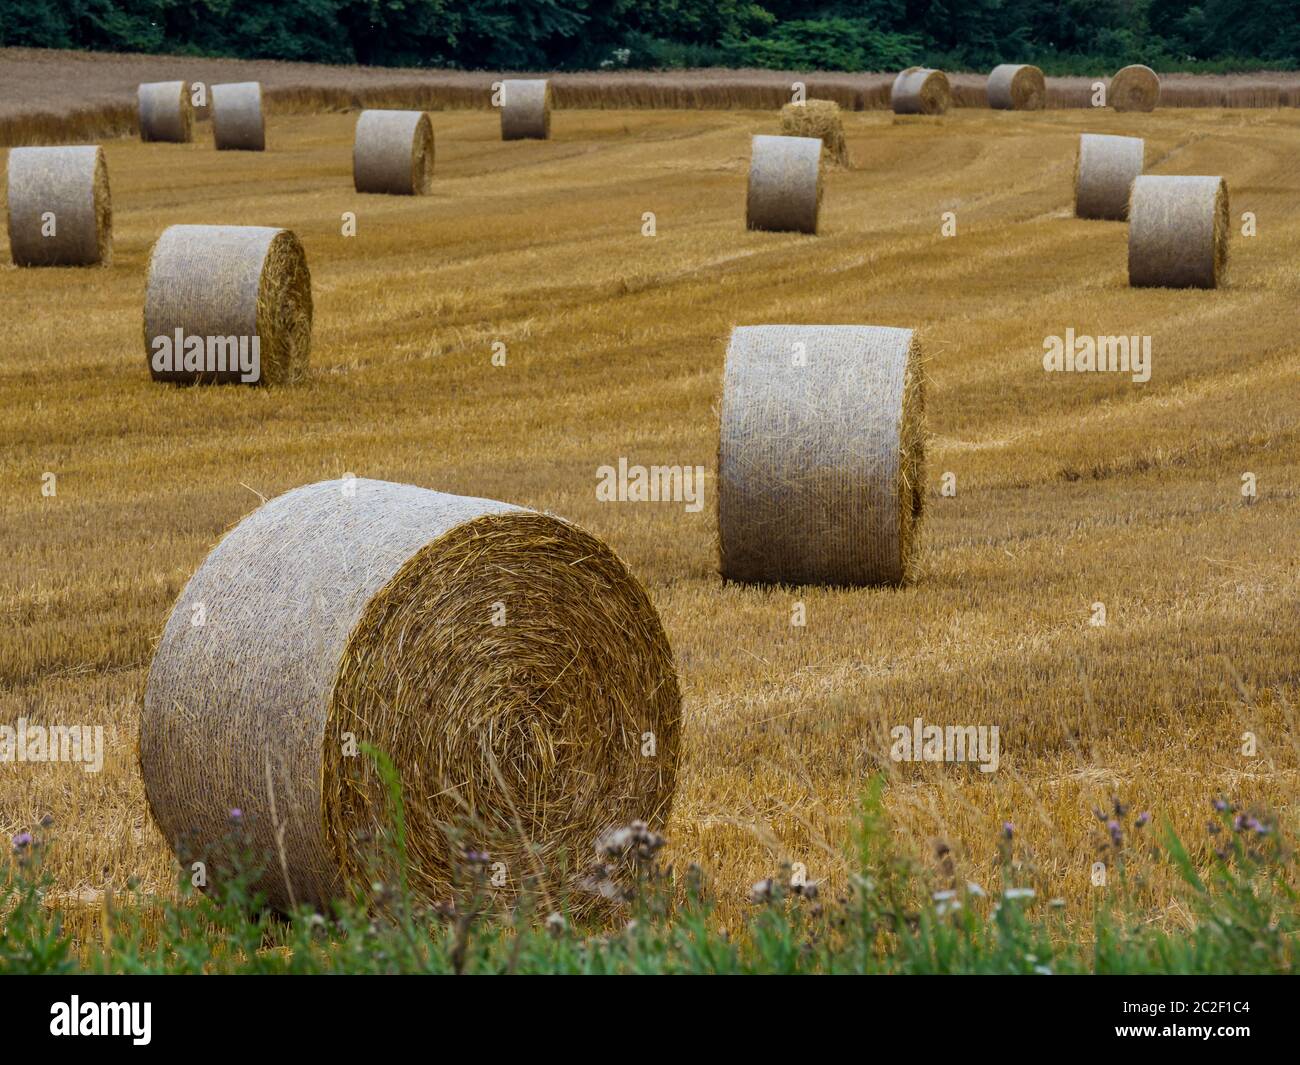 bales of straw lie in an agricultural field after harvesting Stock Photo